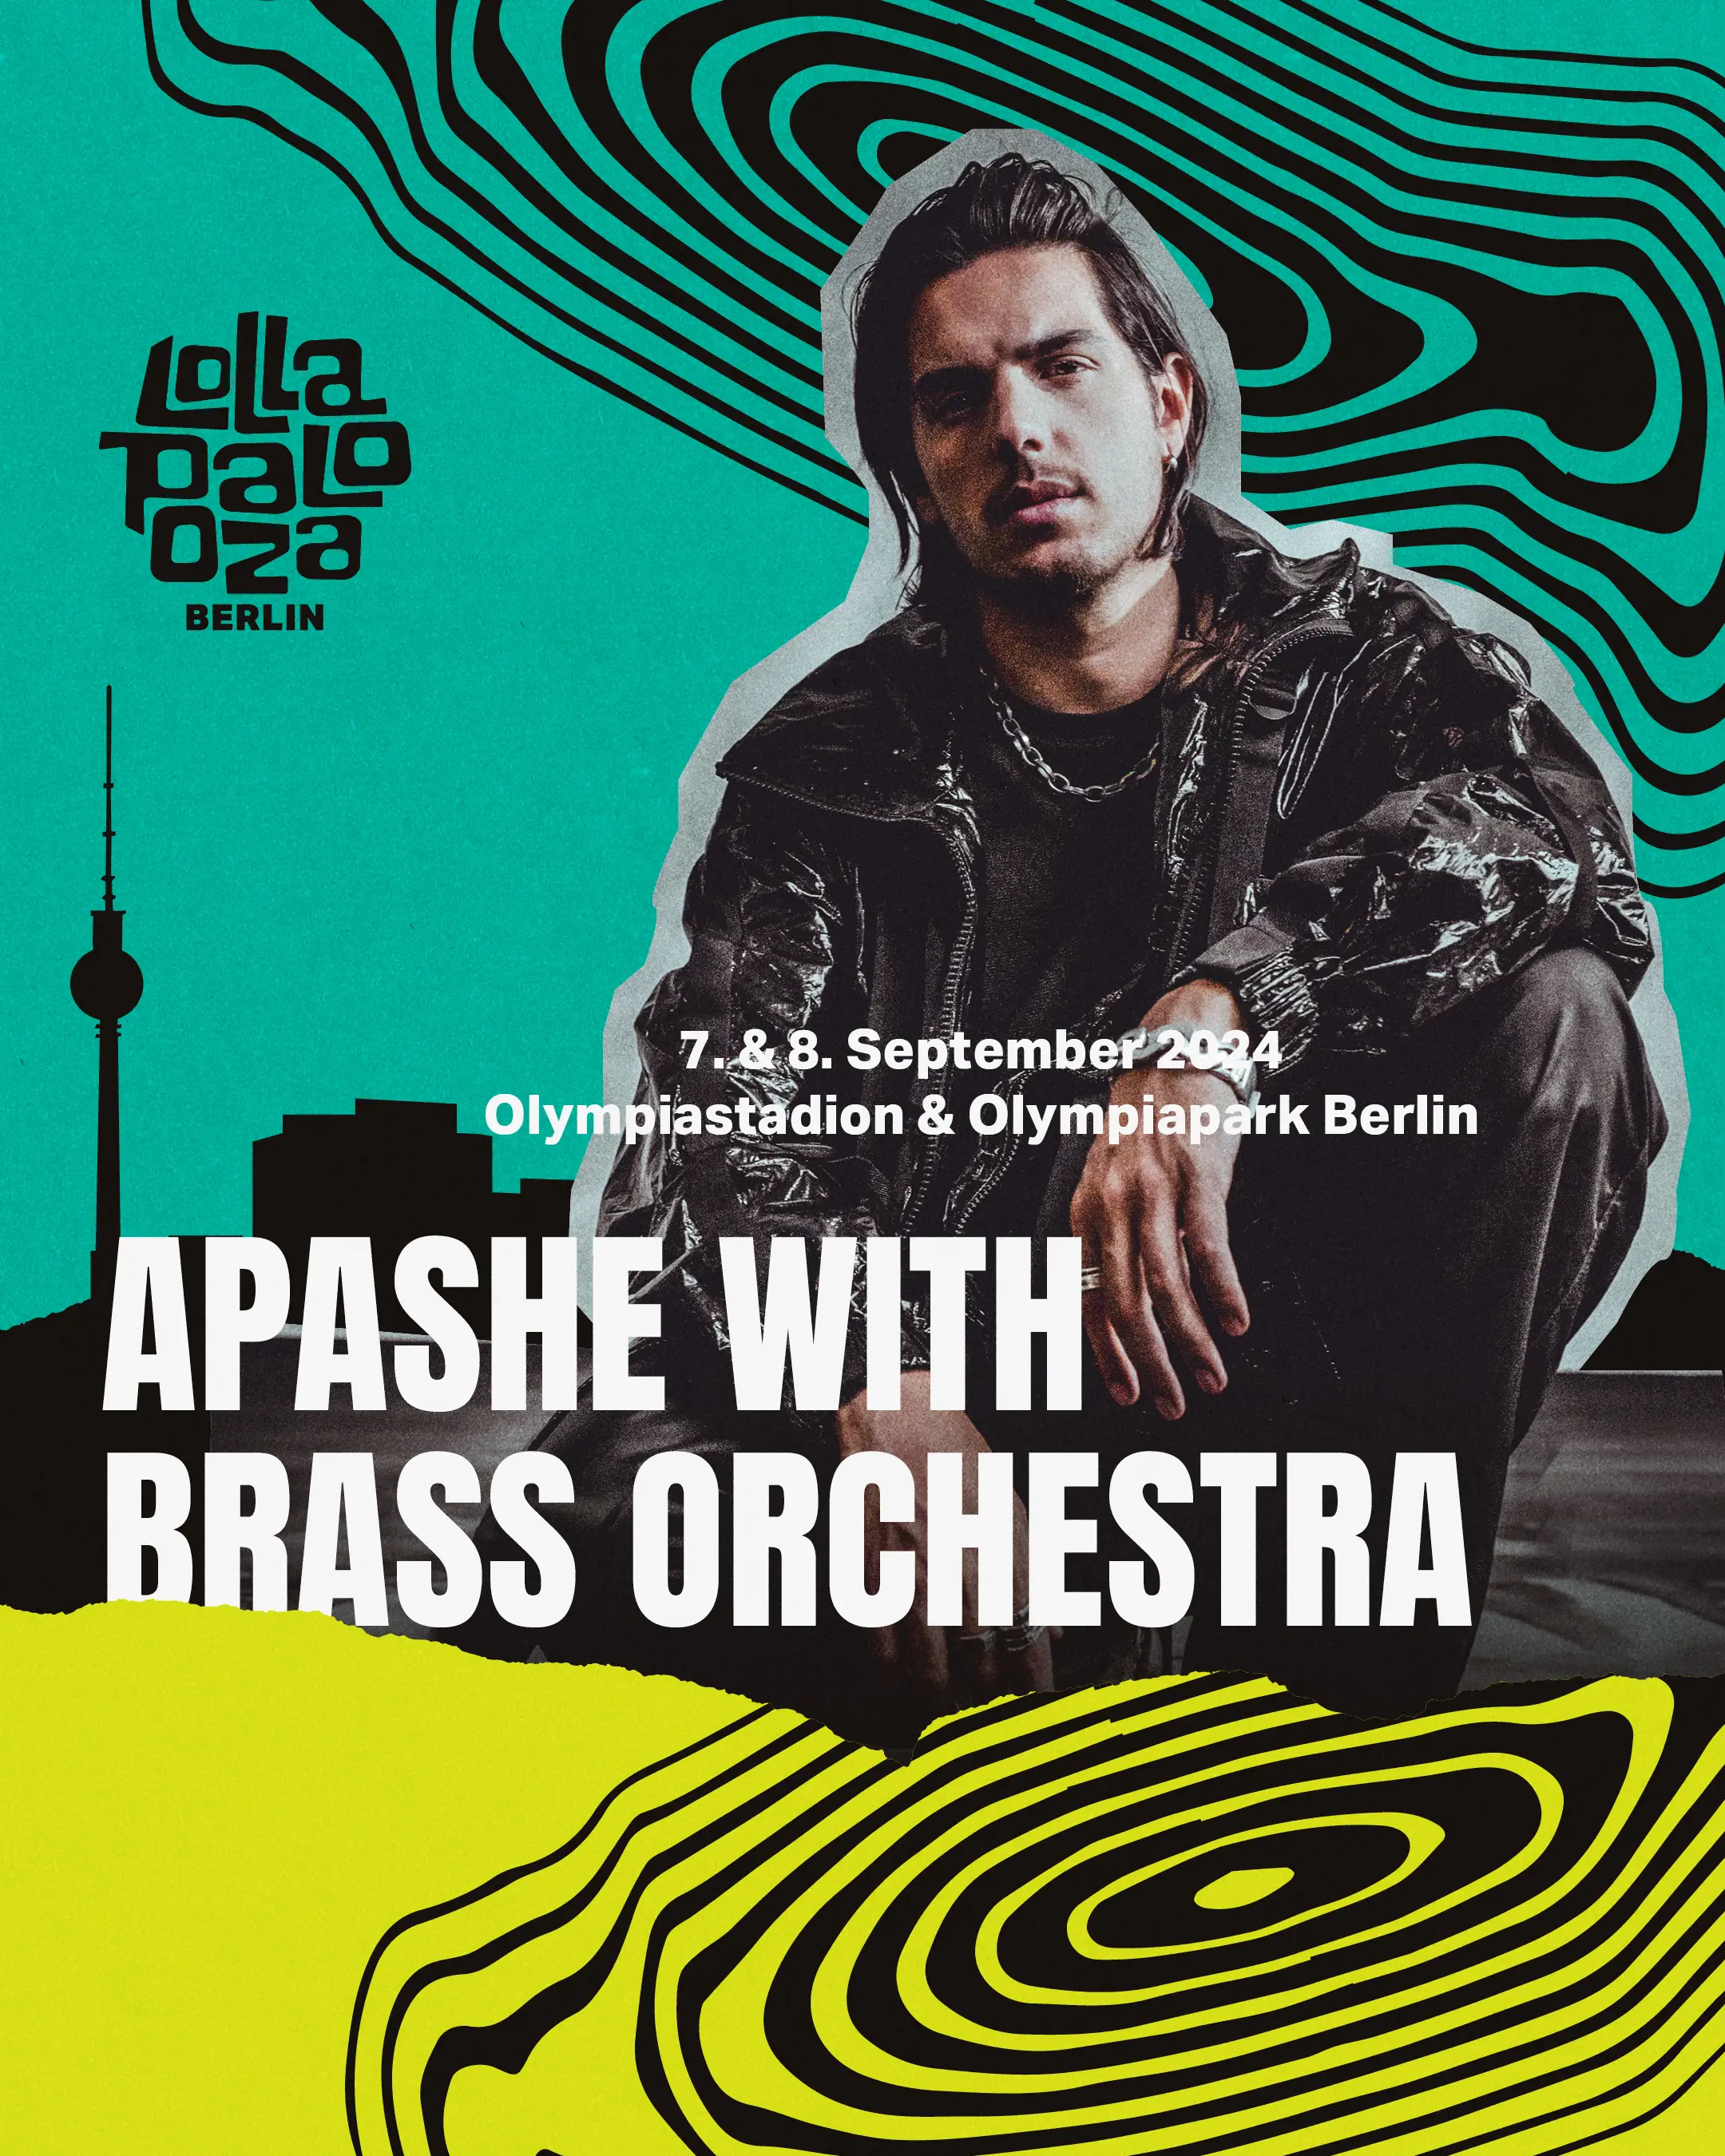 APASHE WITH BRASS ORCHESTRA